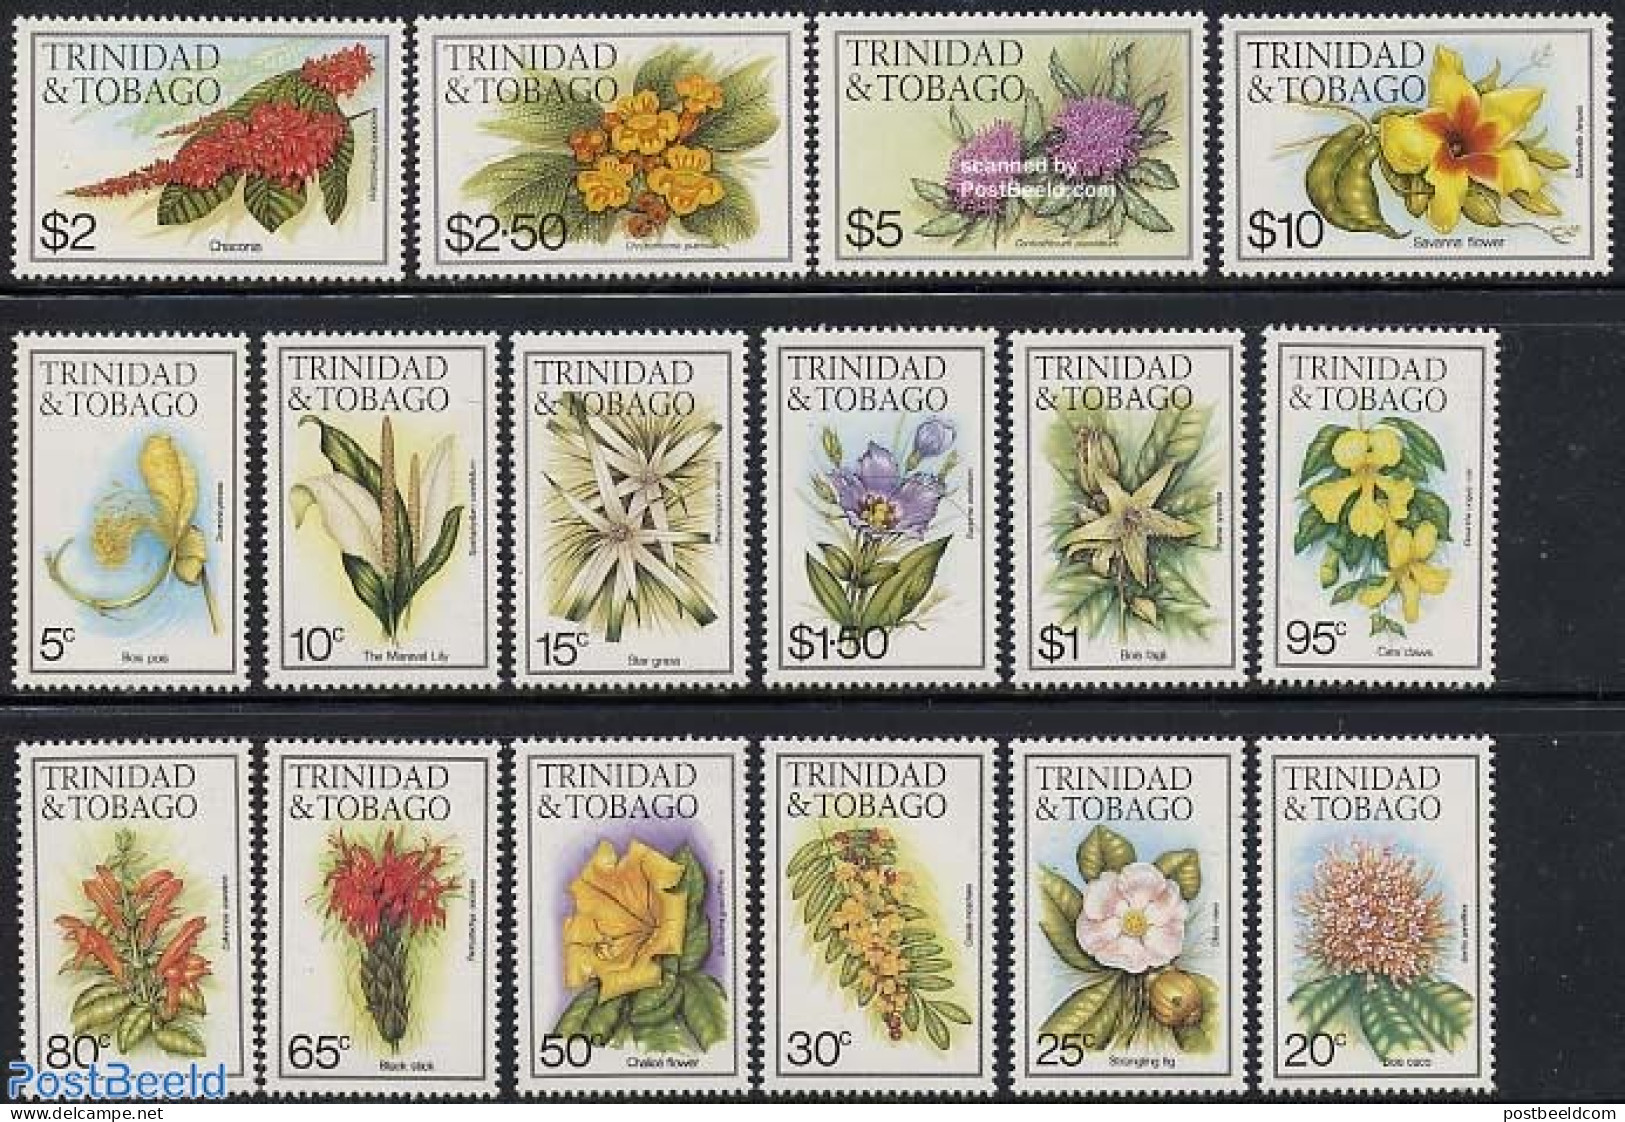 Trinidad & Tobago 1983 Definitives, Flowers 16v (without Year), Mint NH, Nature - Flowers & Plants - Trinidad Y Tobago (1962-...)